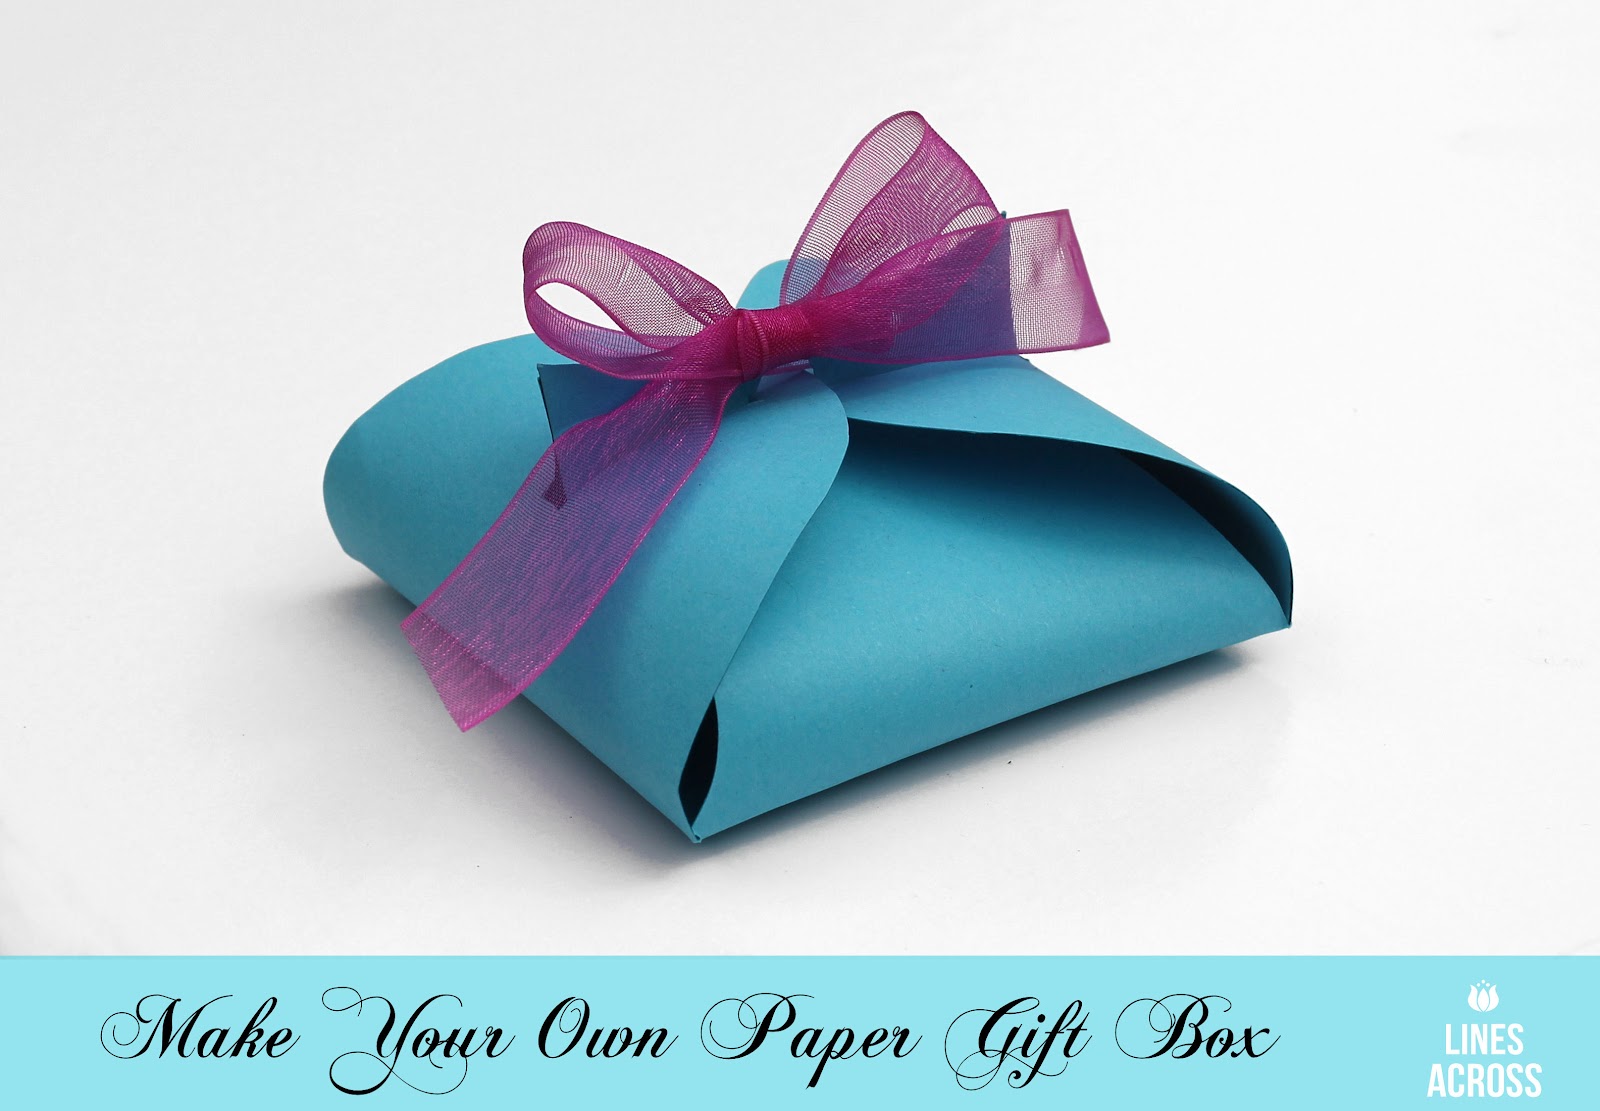 "Lines Across": Make Your Own Paper Gift Box